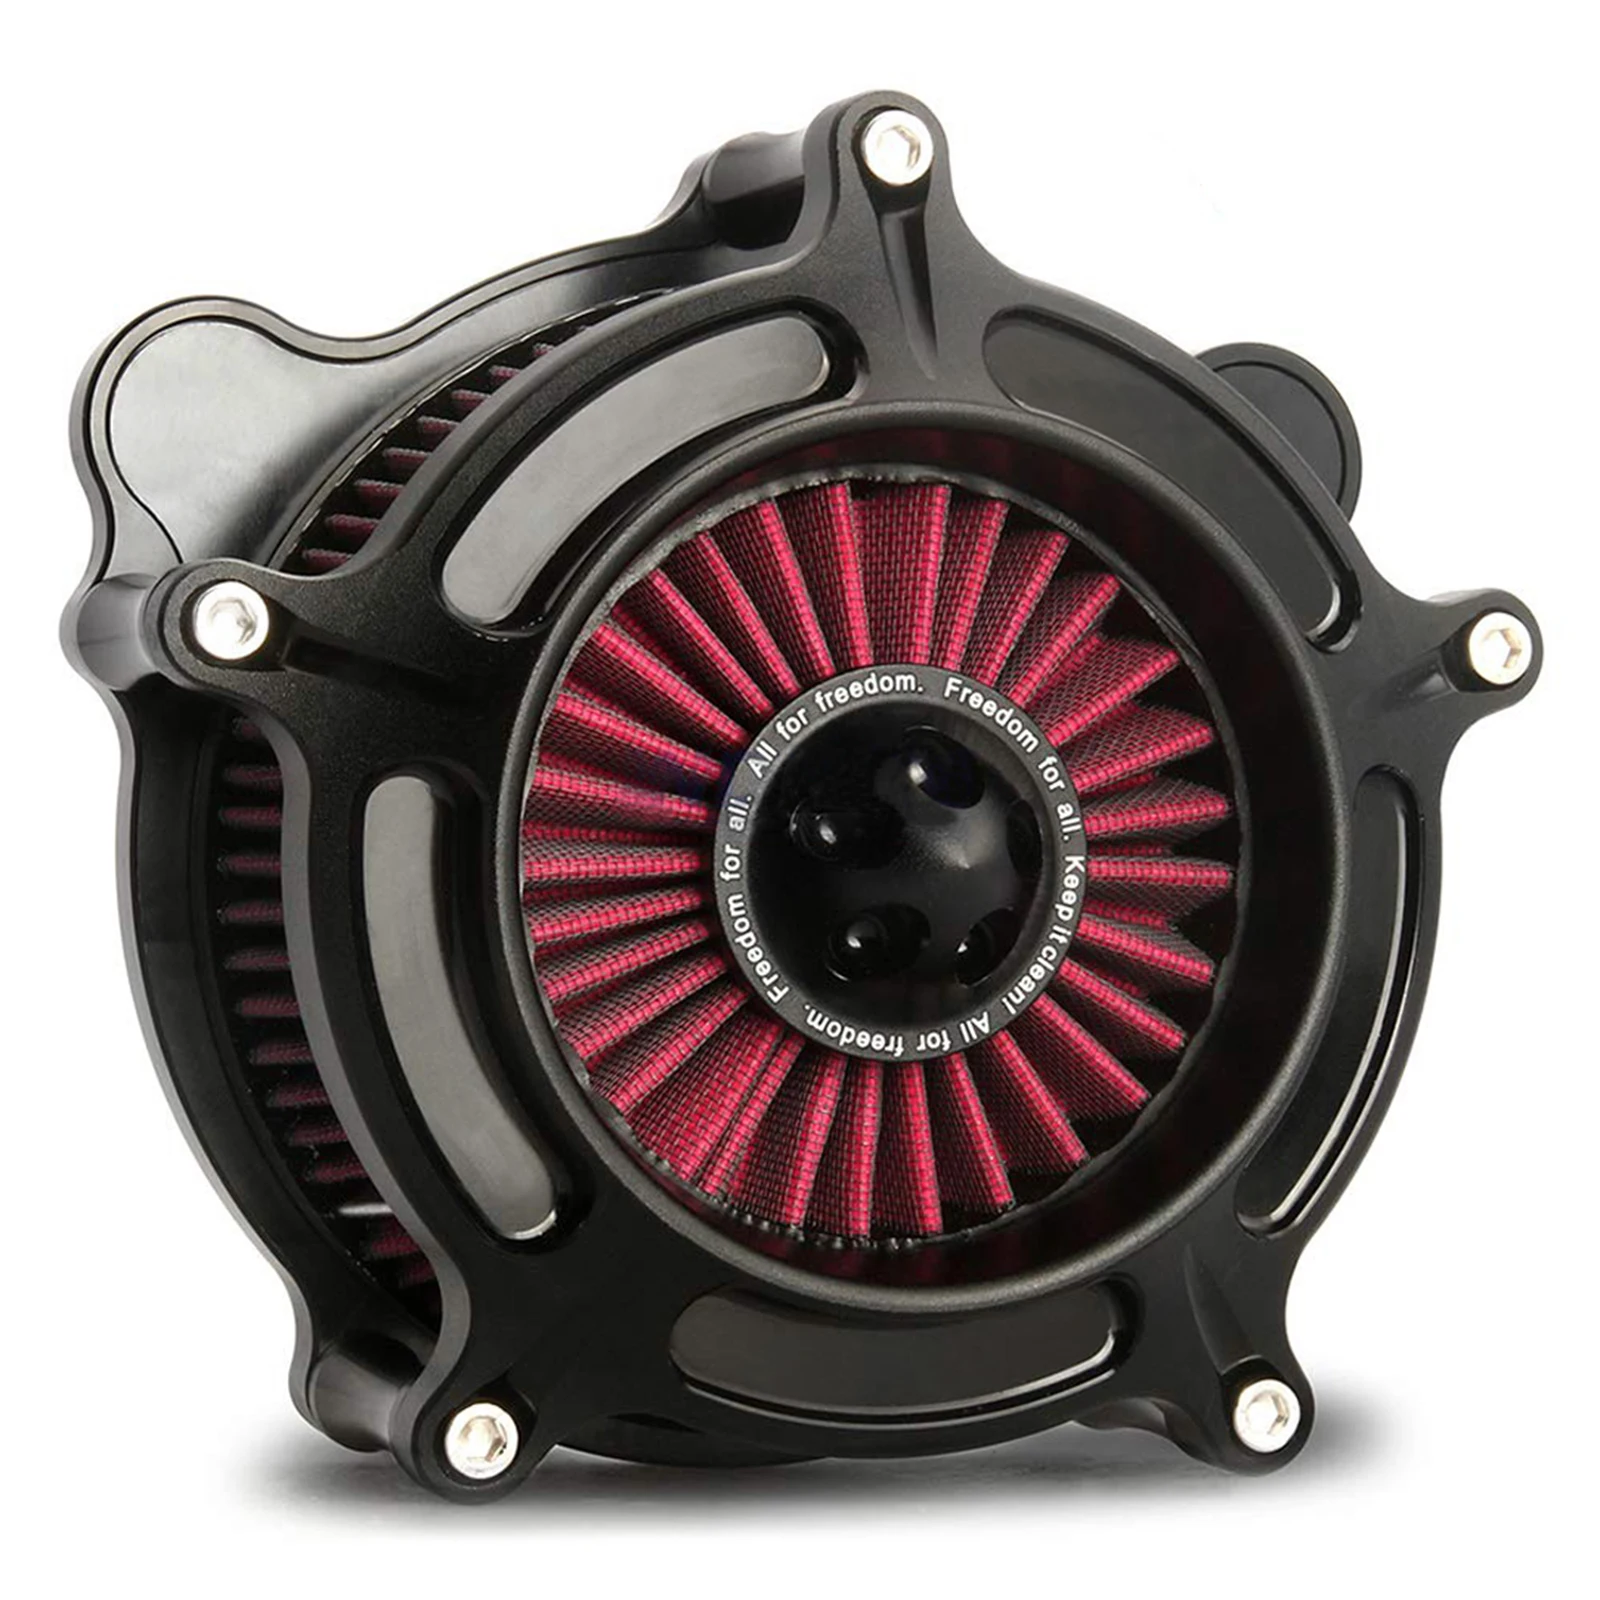 

RED Filter element with Black Turbine Air Cleaner intake For Harley Touring Softail Dyna Sportster 1200 883 Forty Eight